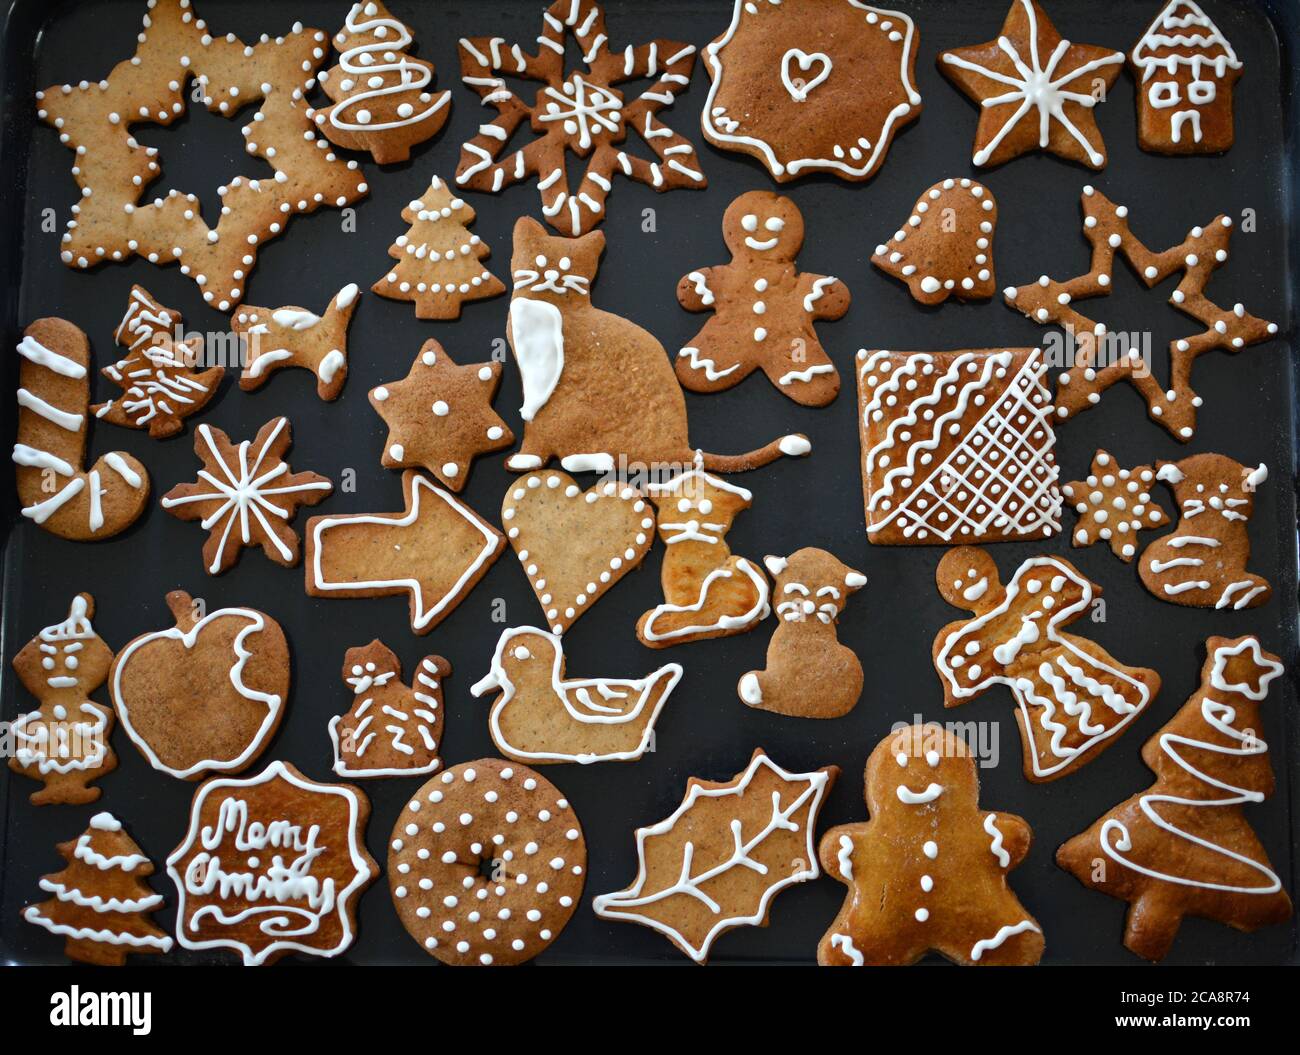 Gingerbread cookies decorated with royal icing on baking sheet. Christmas food. Stock Photo